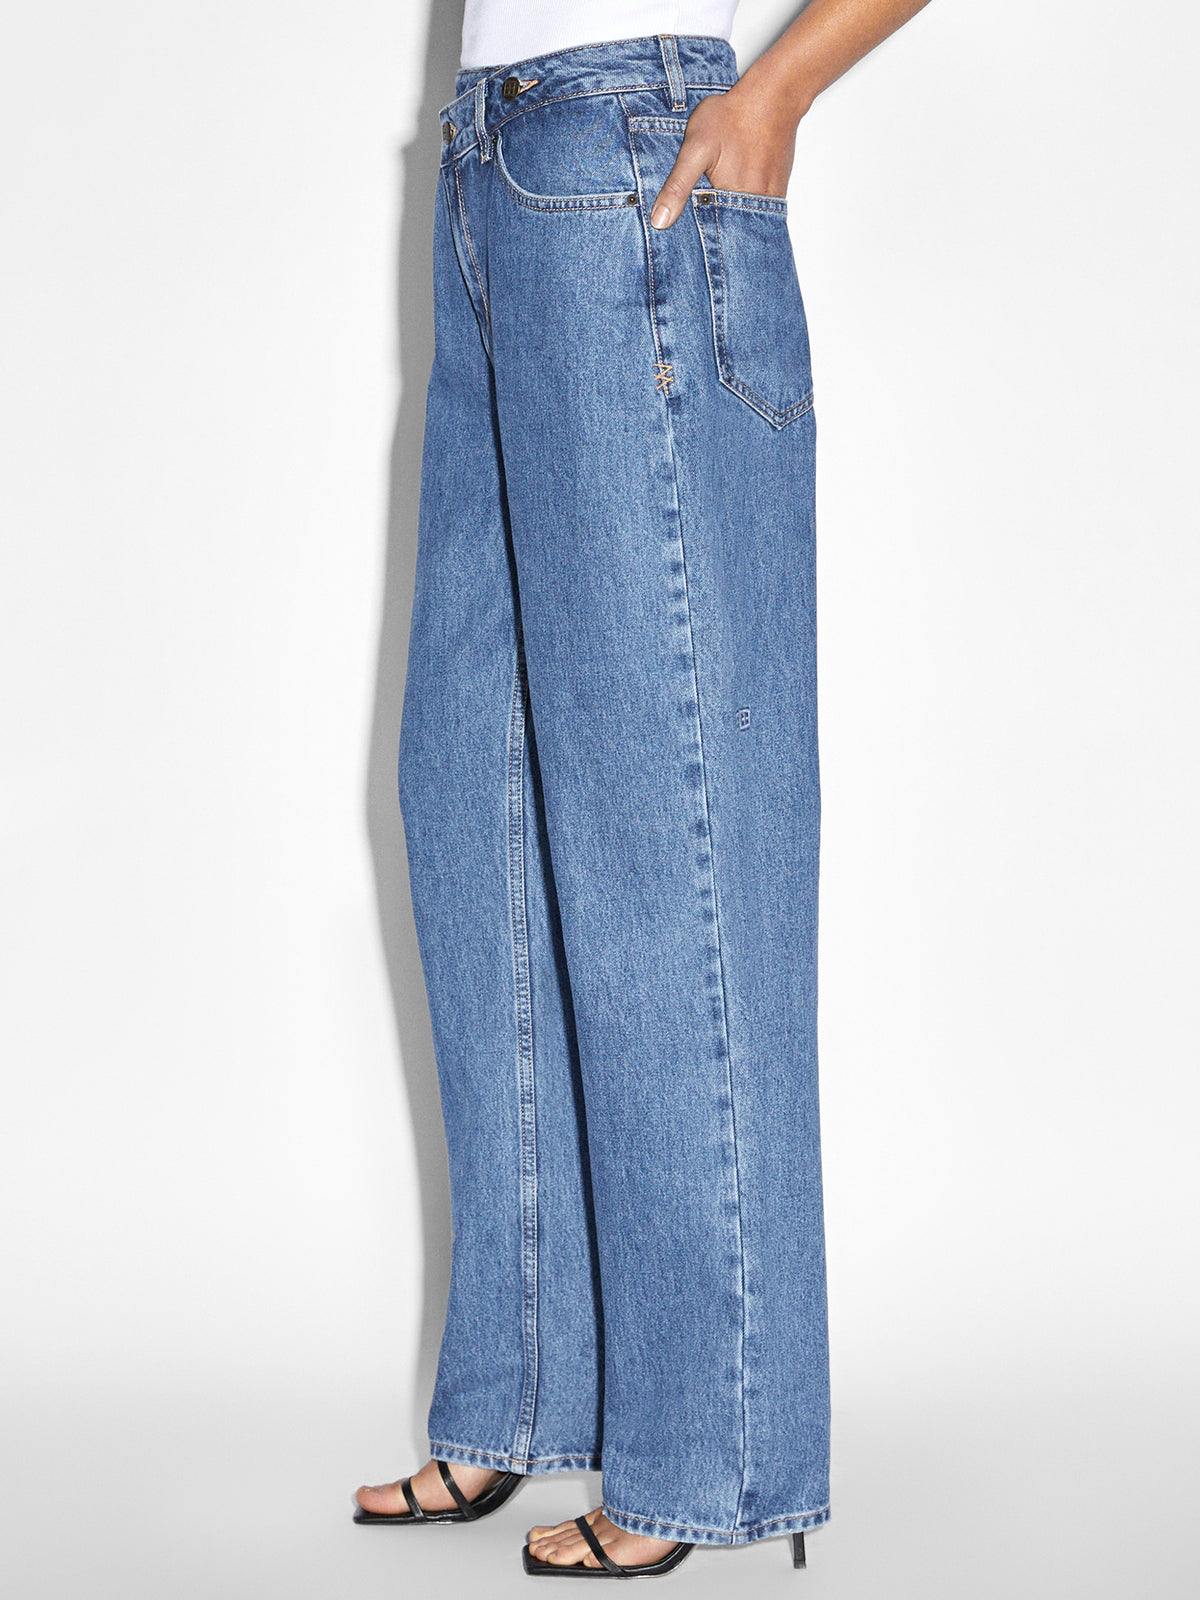 Relax Jeans in Heritage Blue